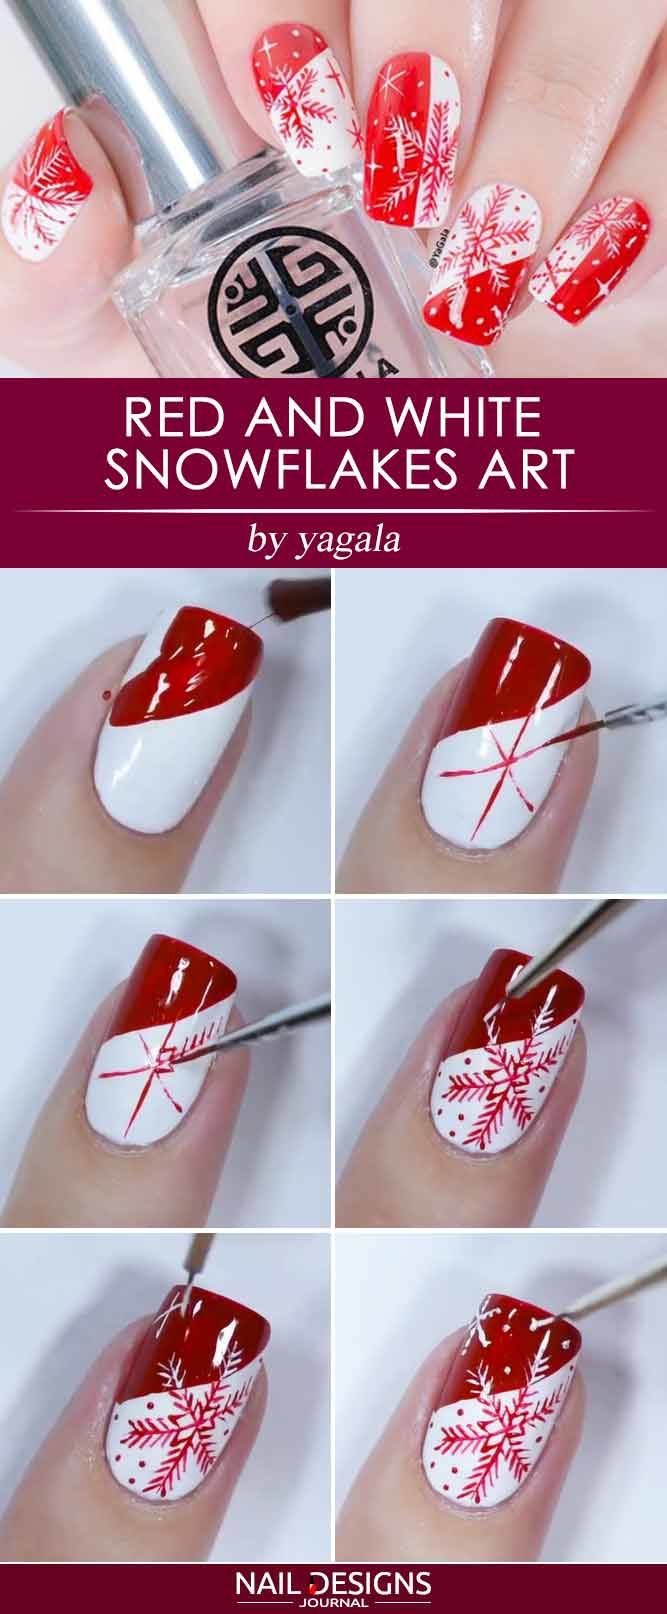 Red And White Snowflakes Art